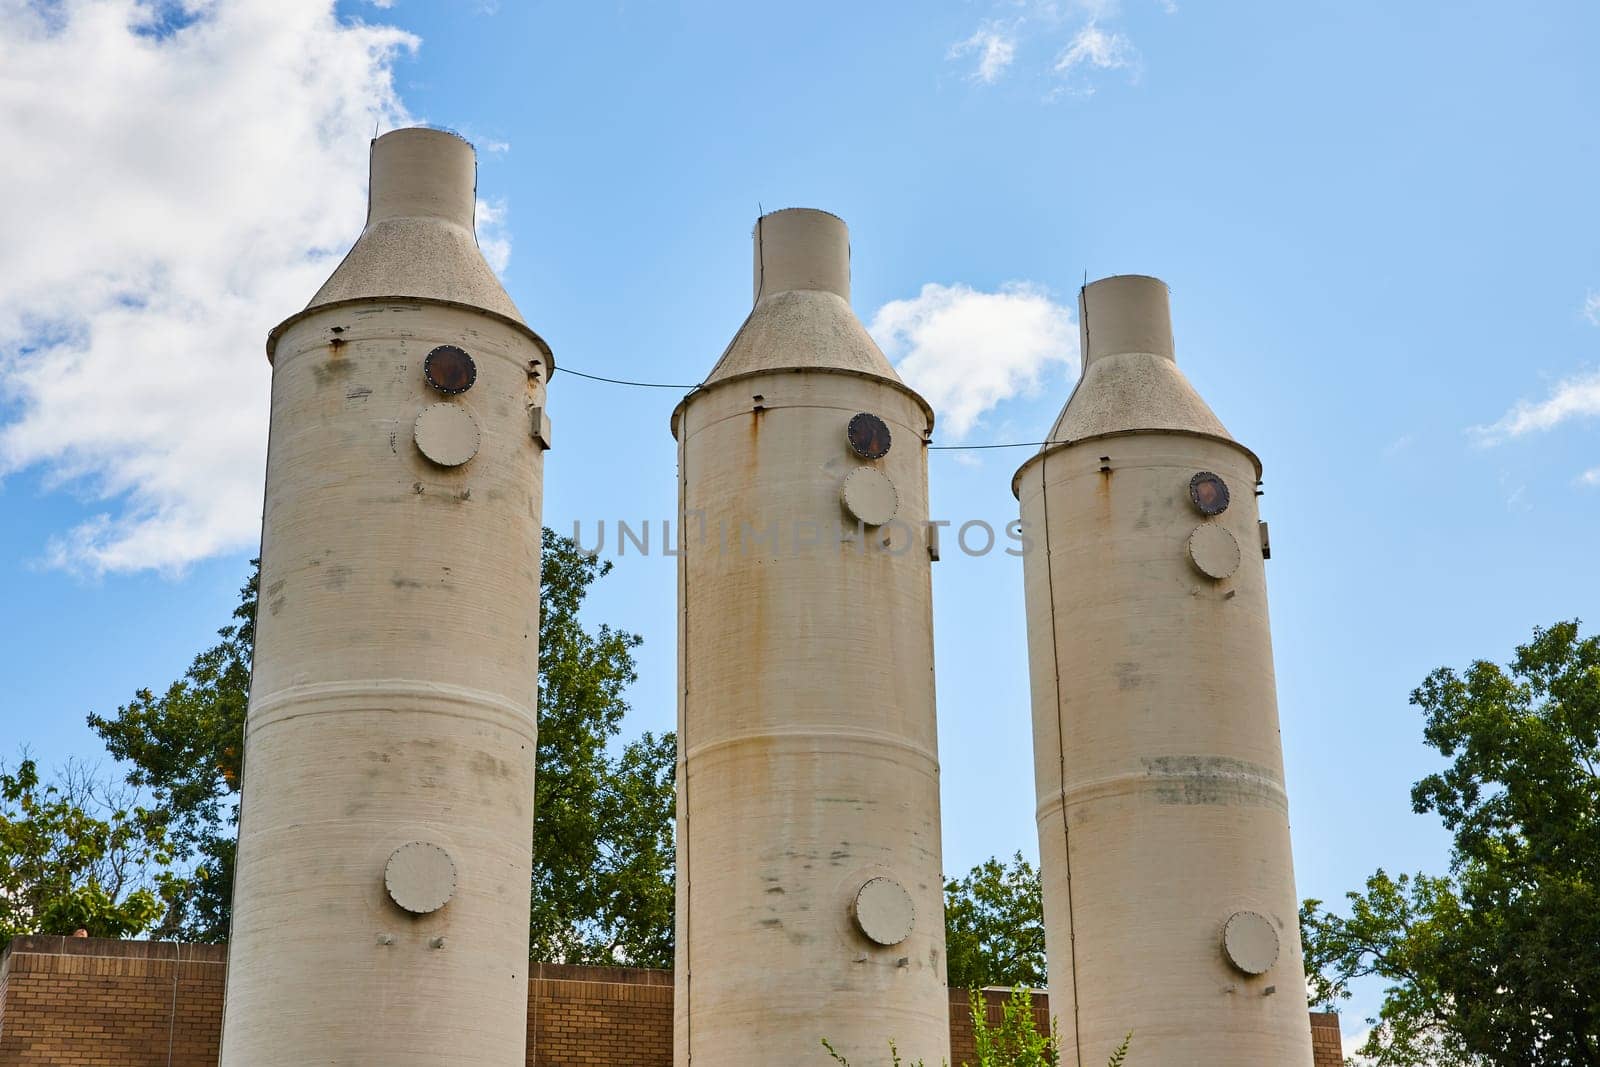 Daytime view of towering industrial silos in the Botanic Gardens of Elkhart, Indiana, showcasing robust infrastructure against a clear blue sky